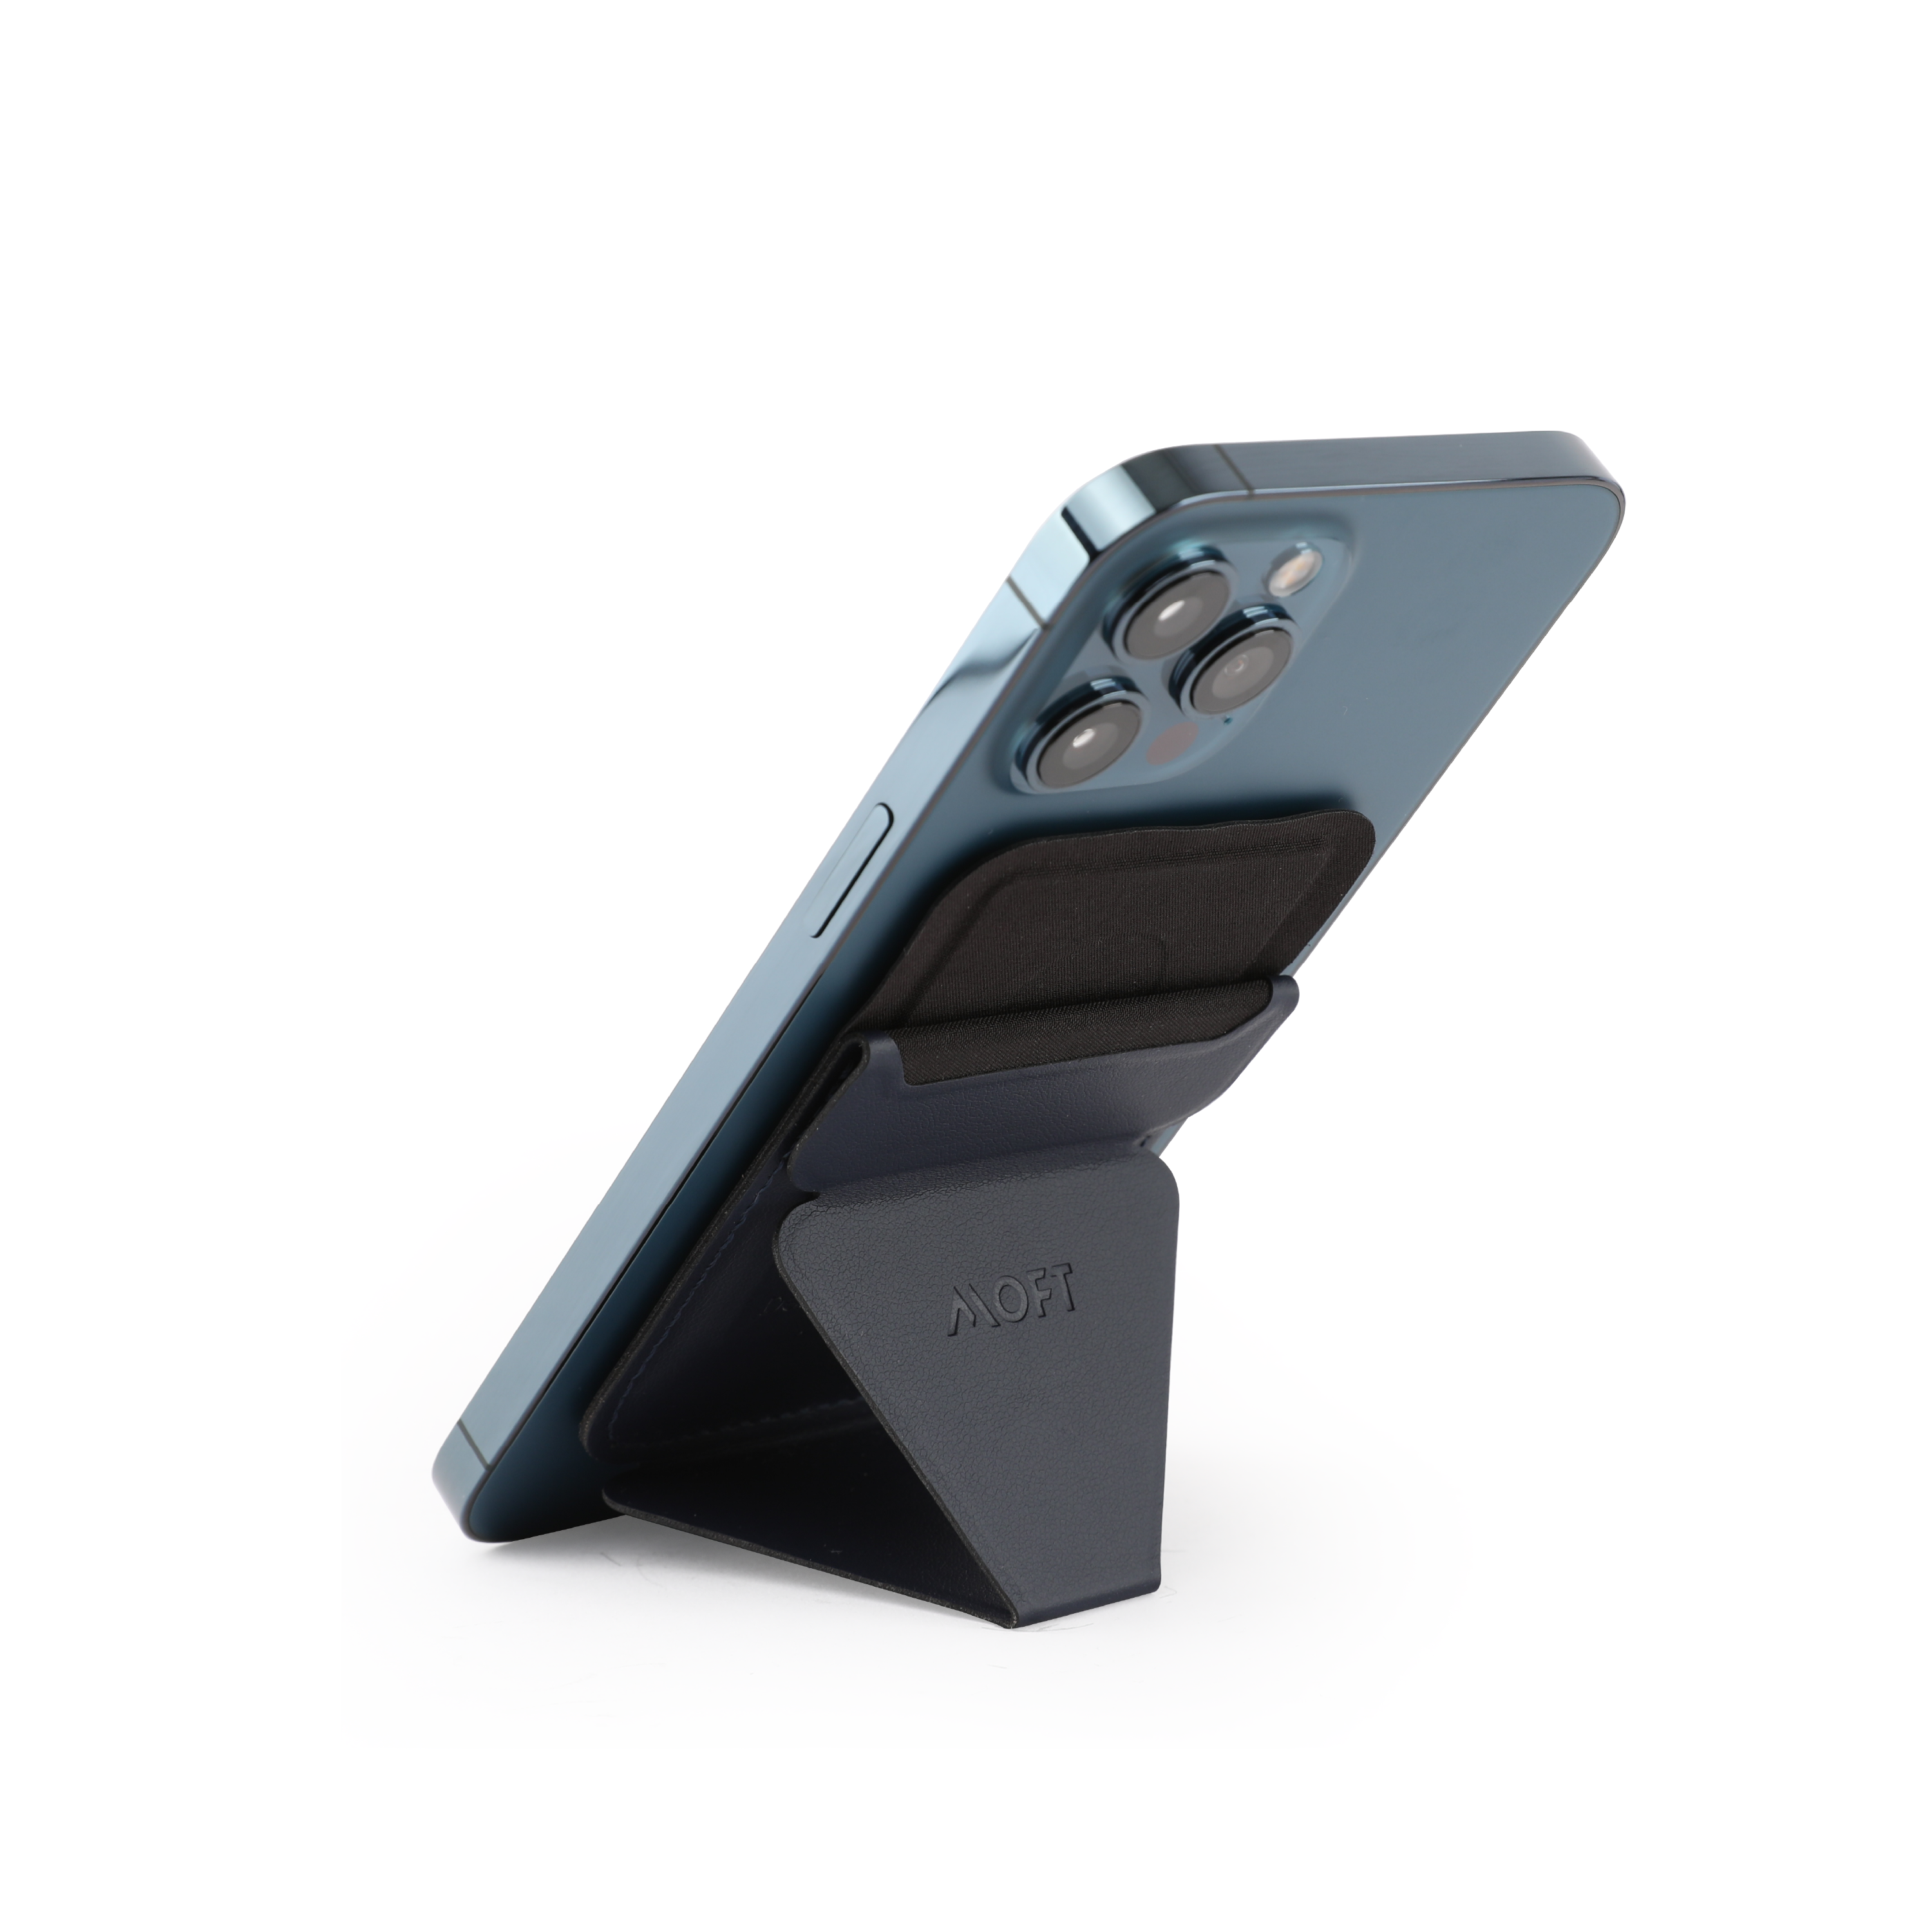 MOFT Snap-on Stand & Wallet for iPhone 12 series is sleek and holds up to  three cards » Gadget Flow